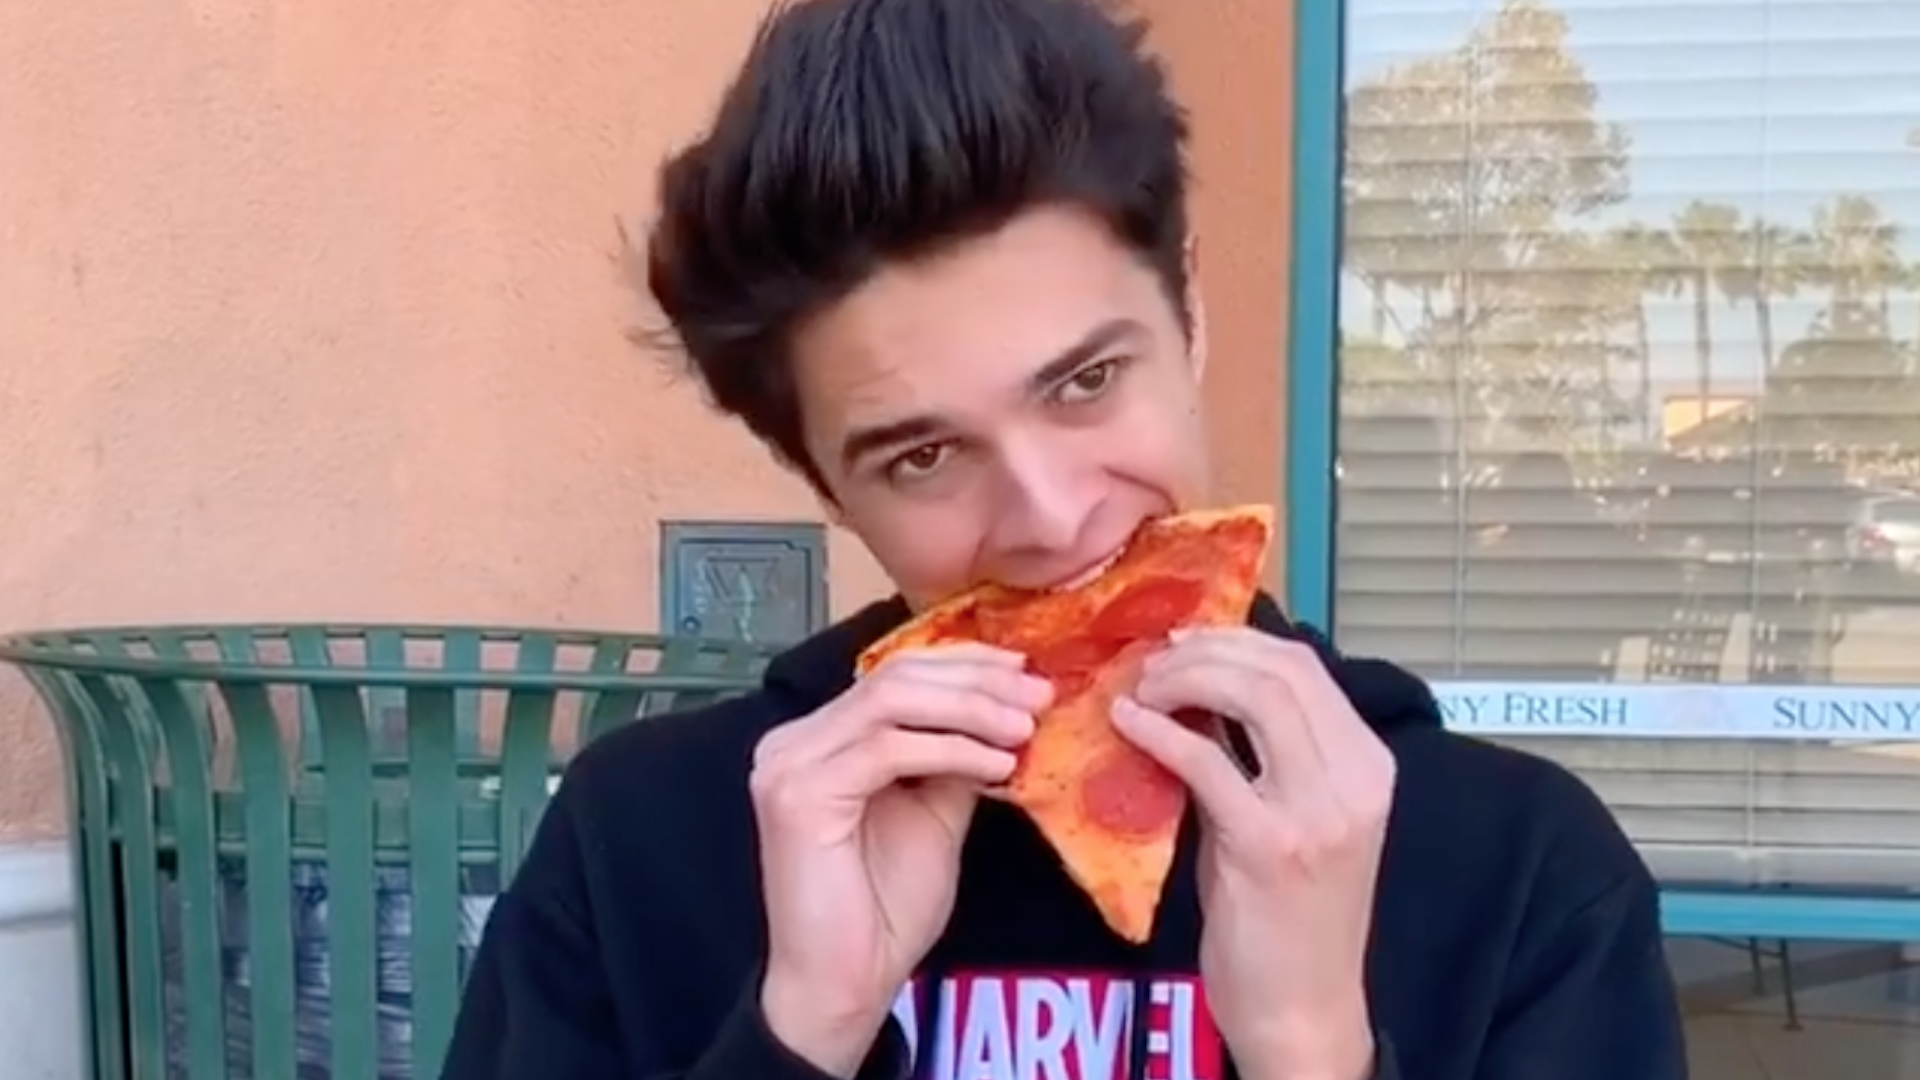 Brent eating a pepperoni pizza